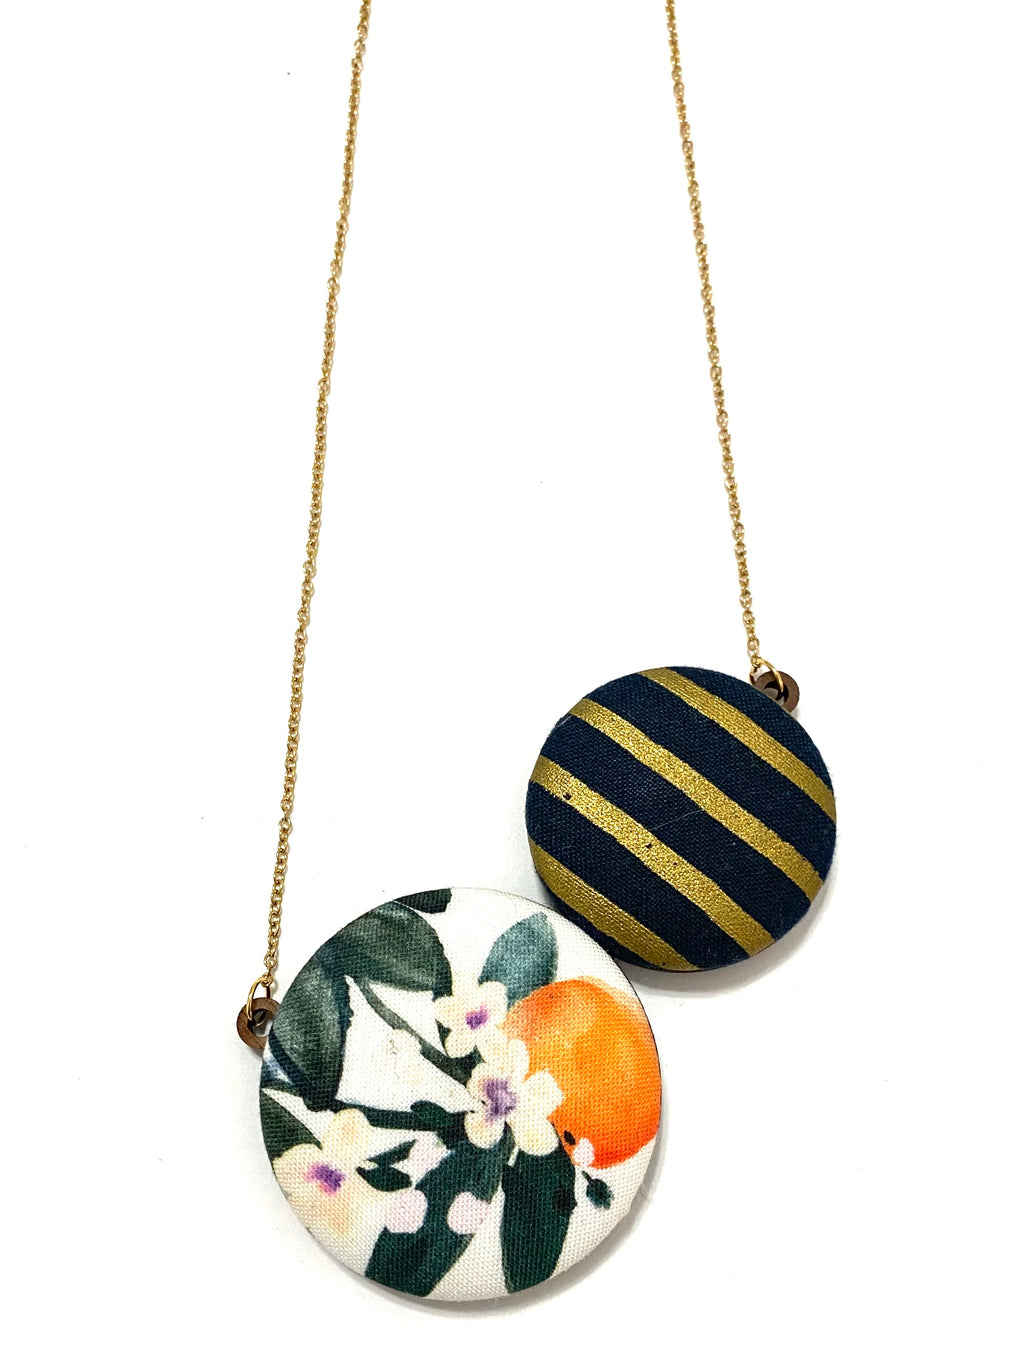 Acaramelao Necklace- Citrus and Gold